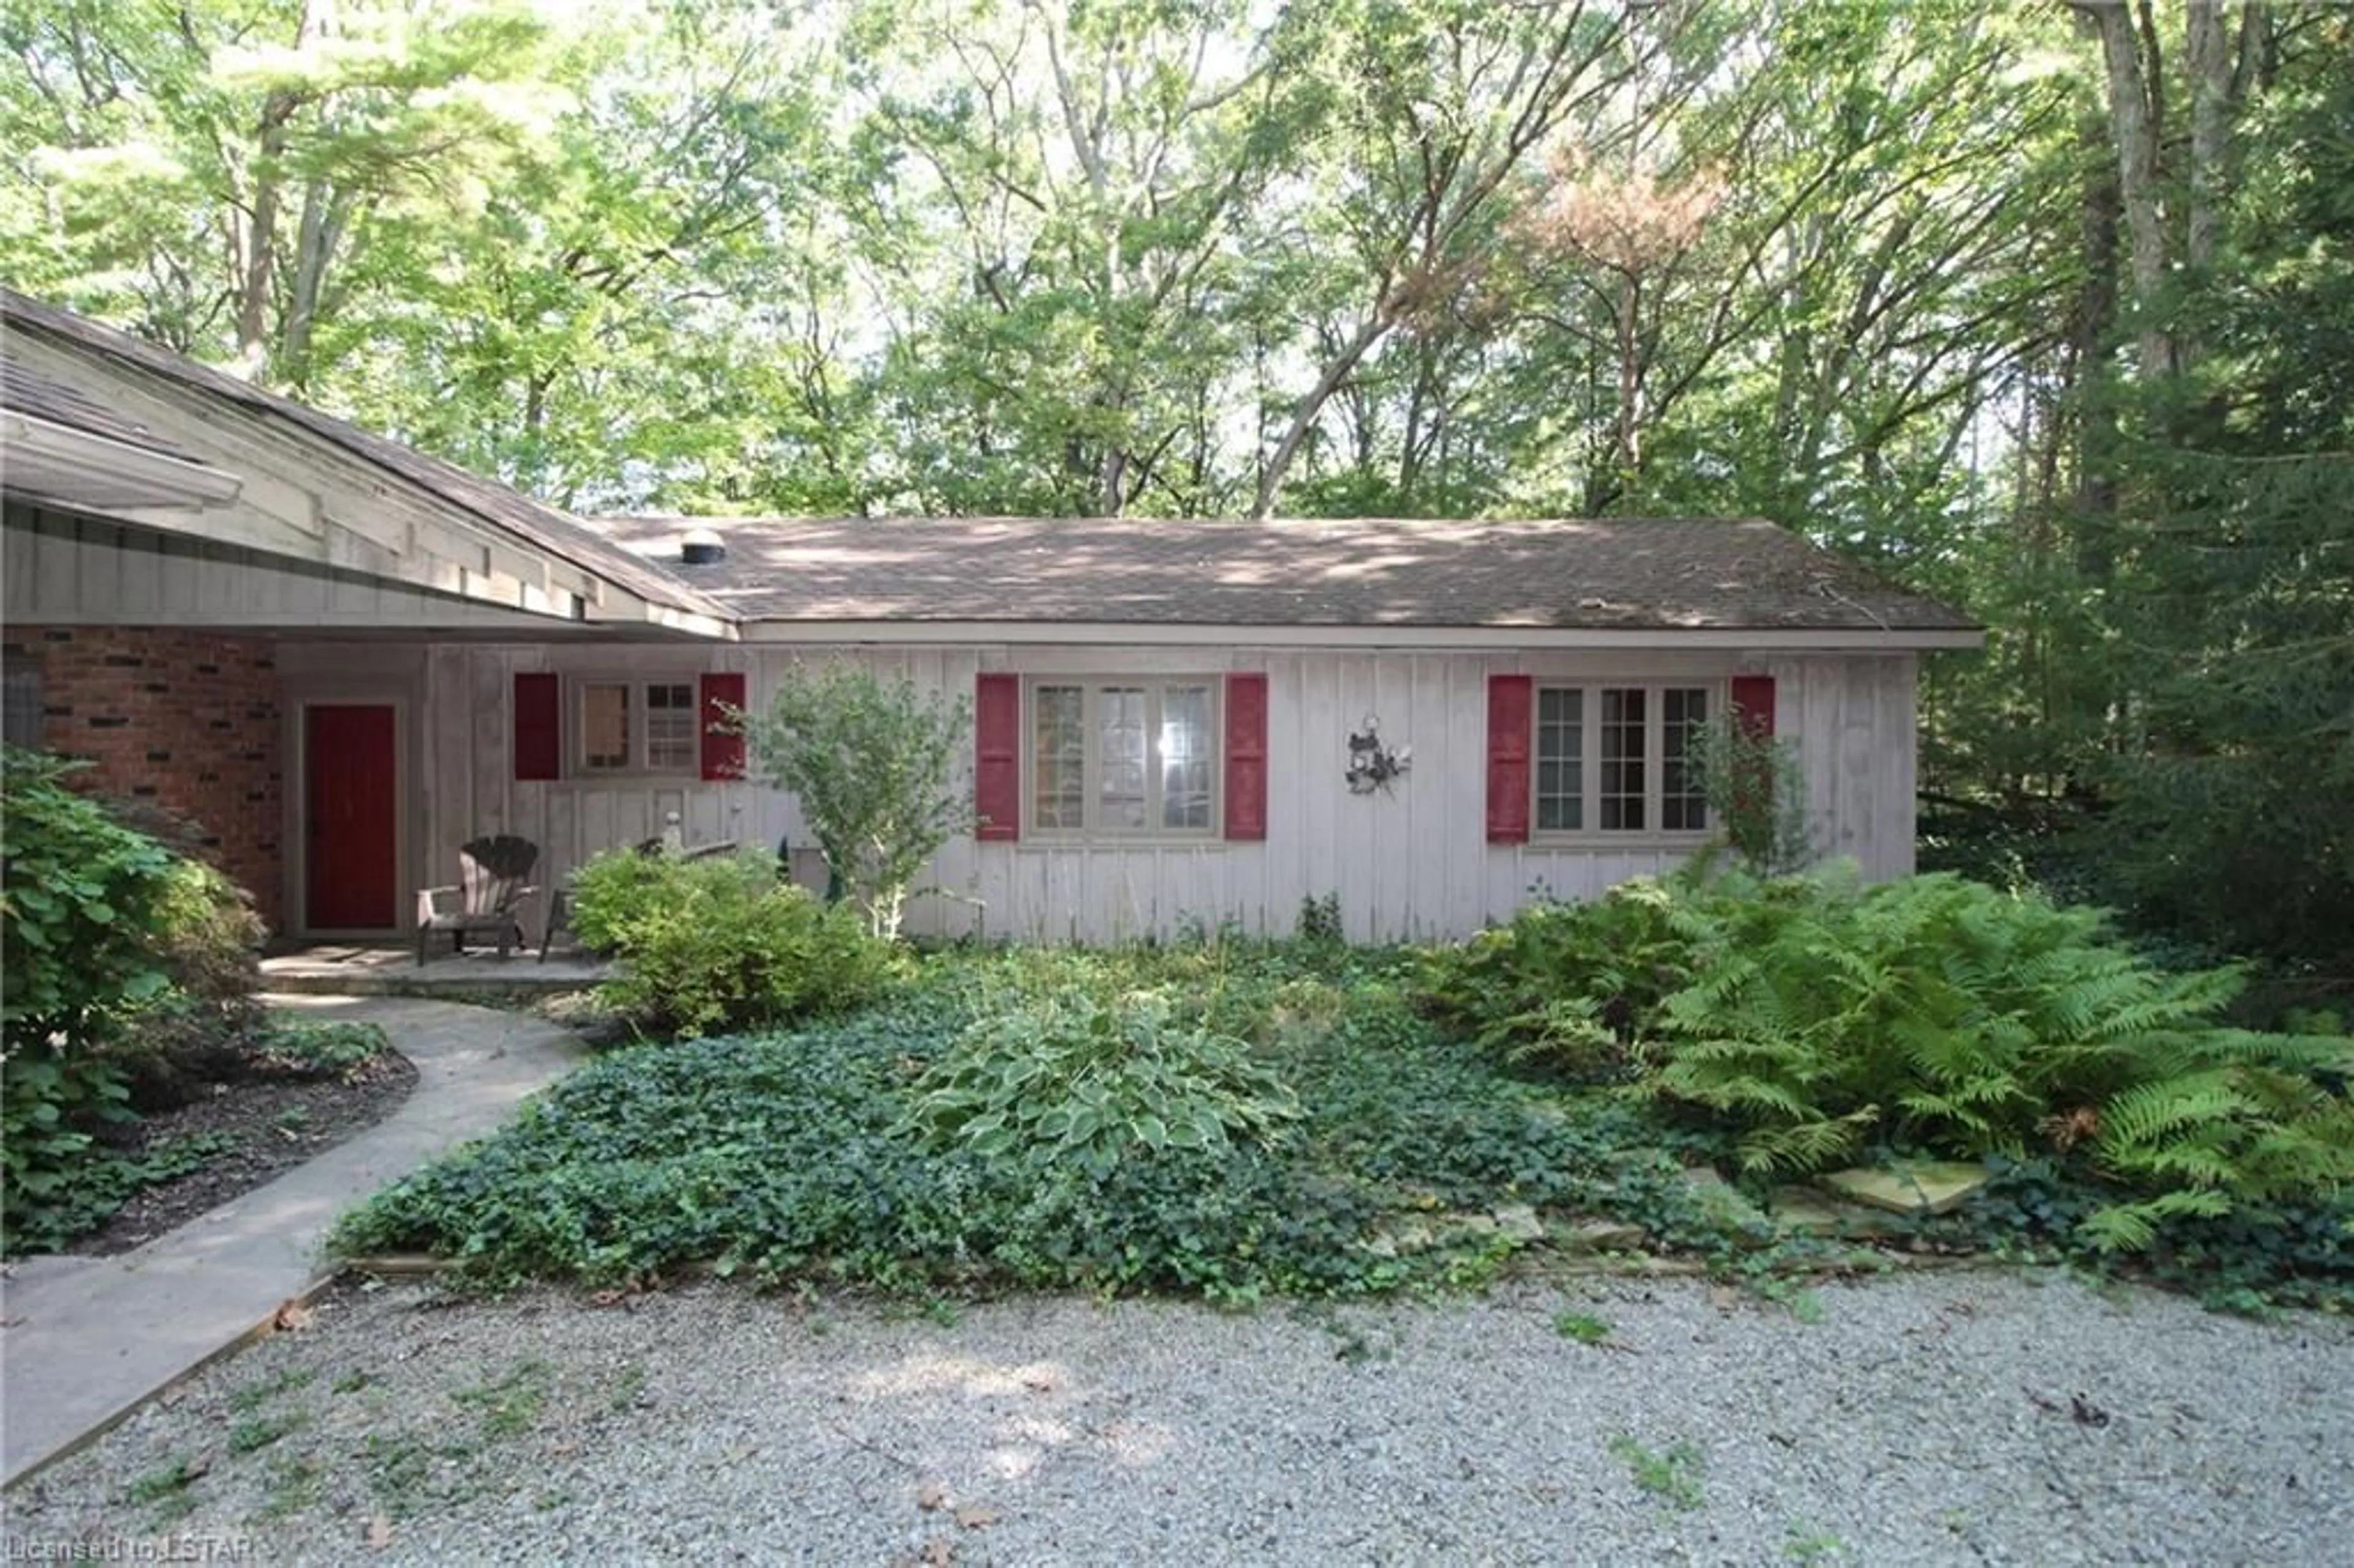 Cottage for 10284 Birch Lane, Grand Bend Ontario N0M 1T0